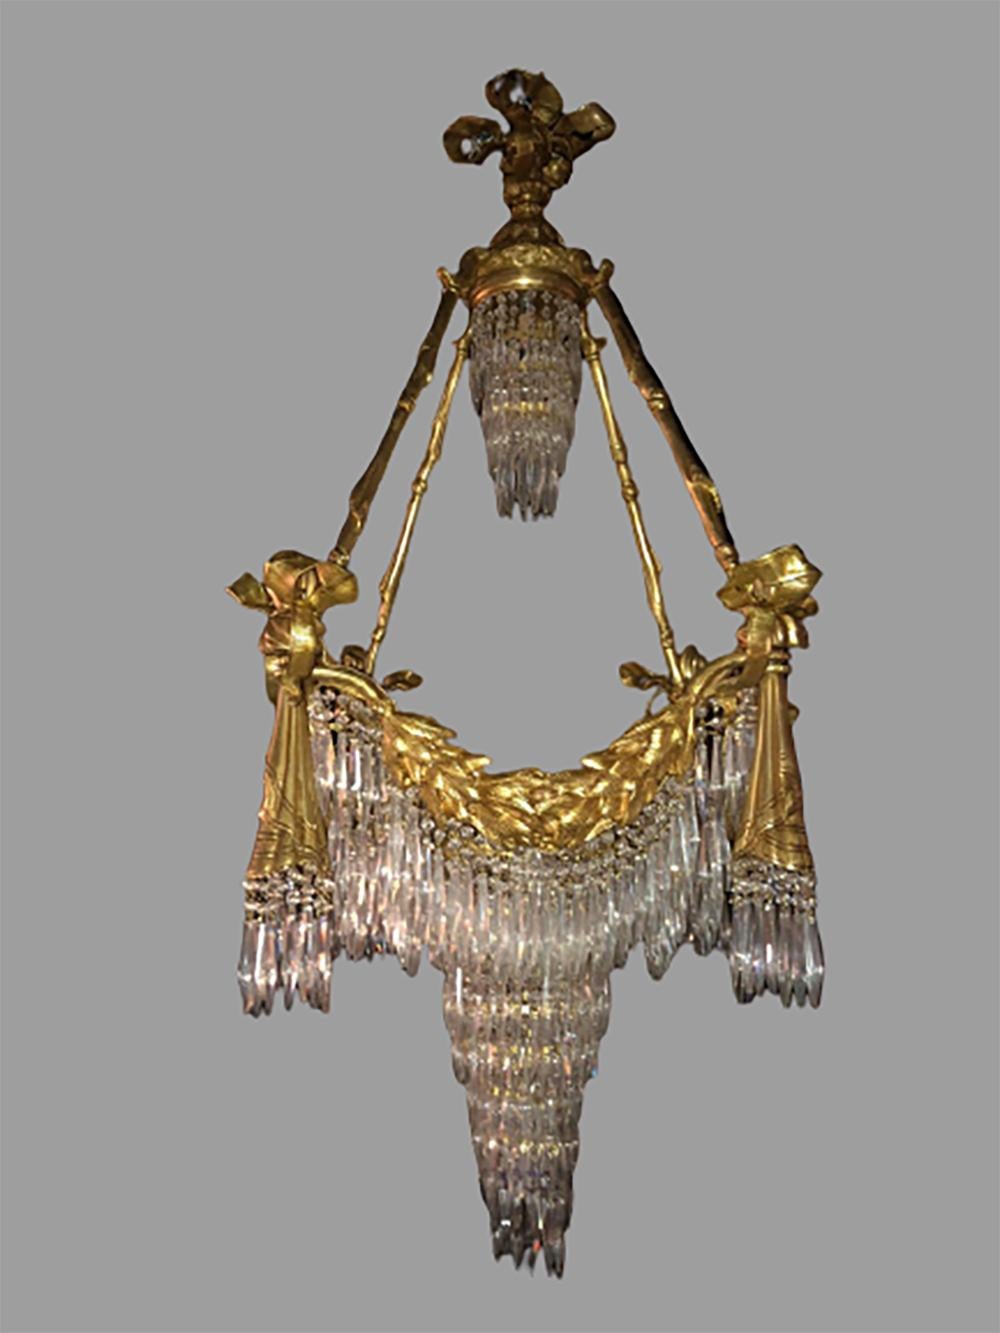 Bronze Louis XVI style crystal ribbon and tassel drapery chandelier with 18 lights. Newly wired. This fine custom quality chandelier is simply stunning and certain to light up any area of the home. The ribbon and tassel form doré bronze fixtures